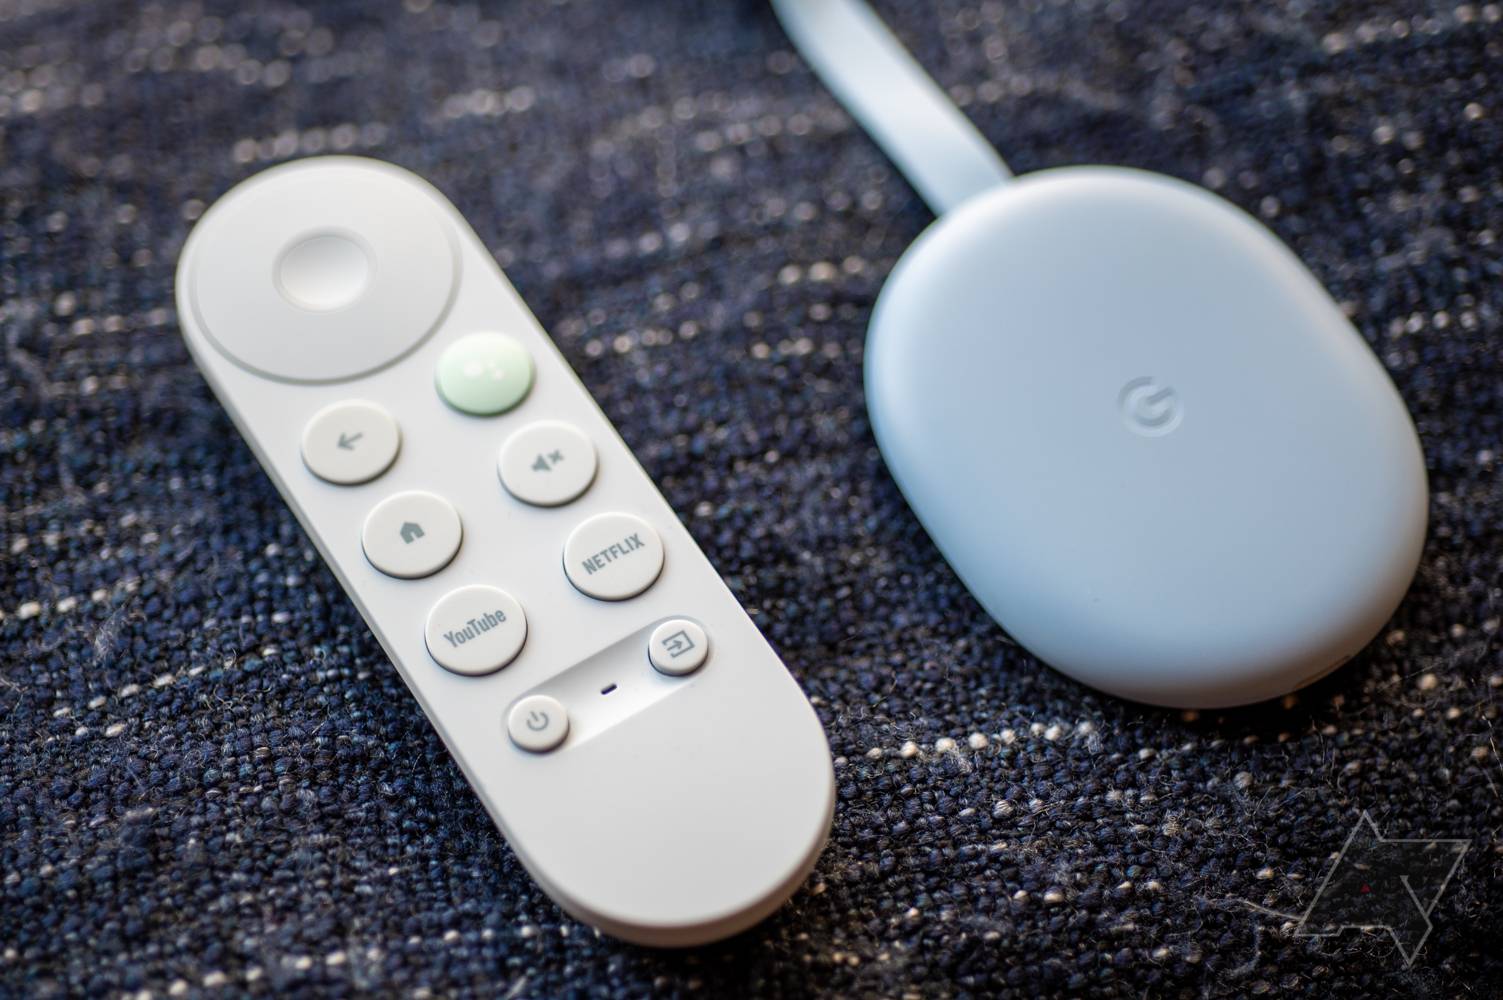 Your Chromecast with Google TV's next update might finally ditch the lag